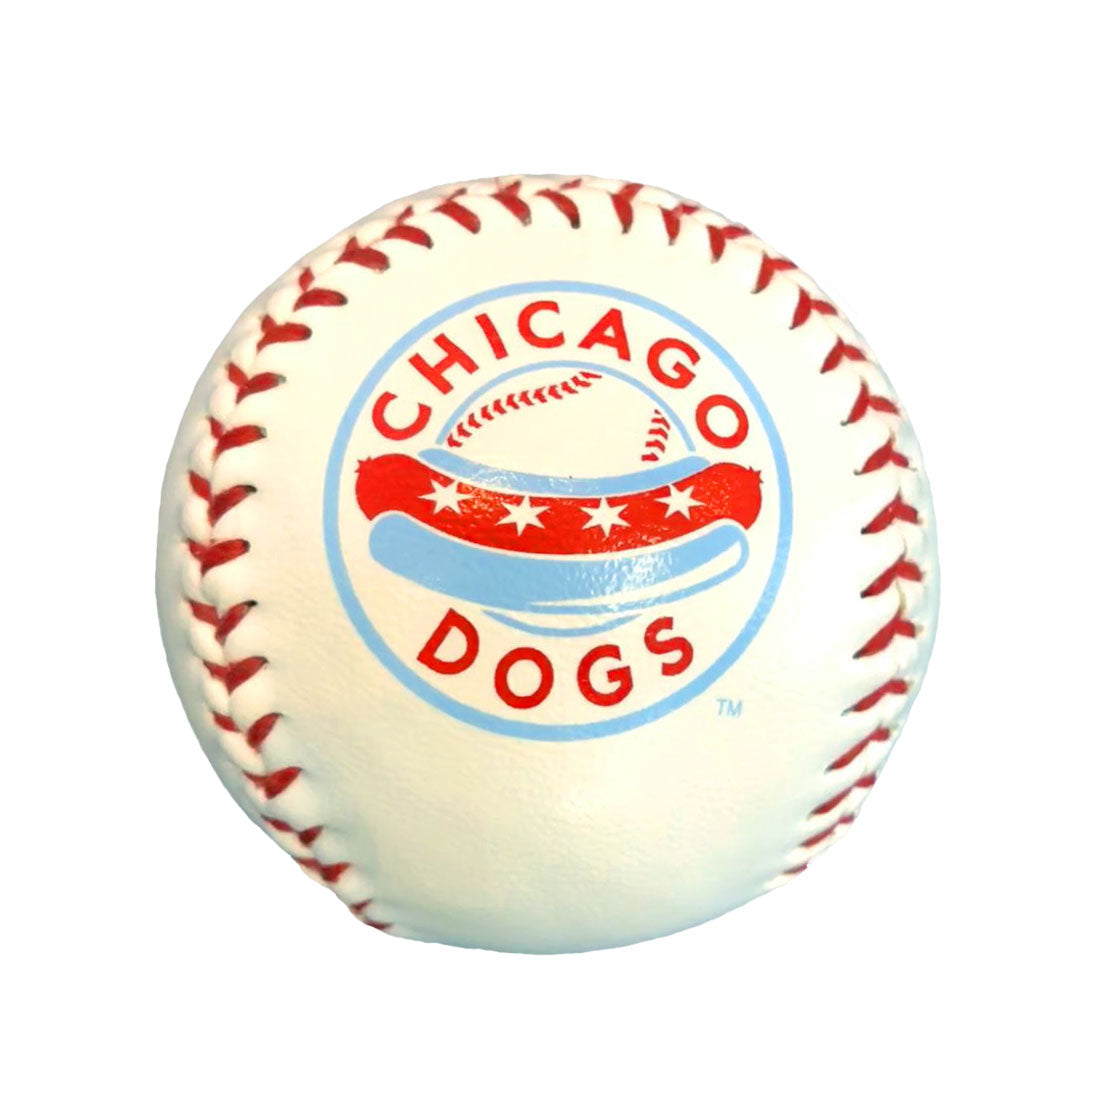 Chicago Dogs Rawlings Team Logo Baseball – Chicago Dogs Team Store